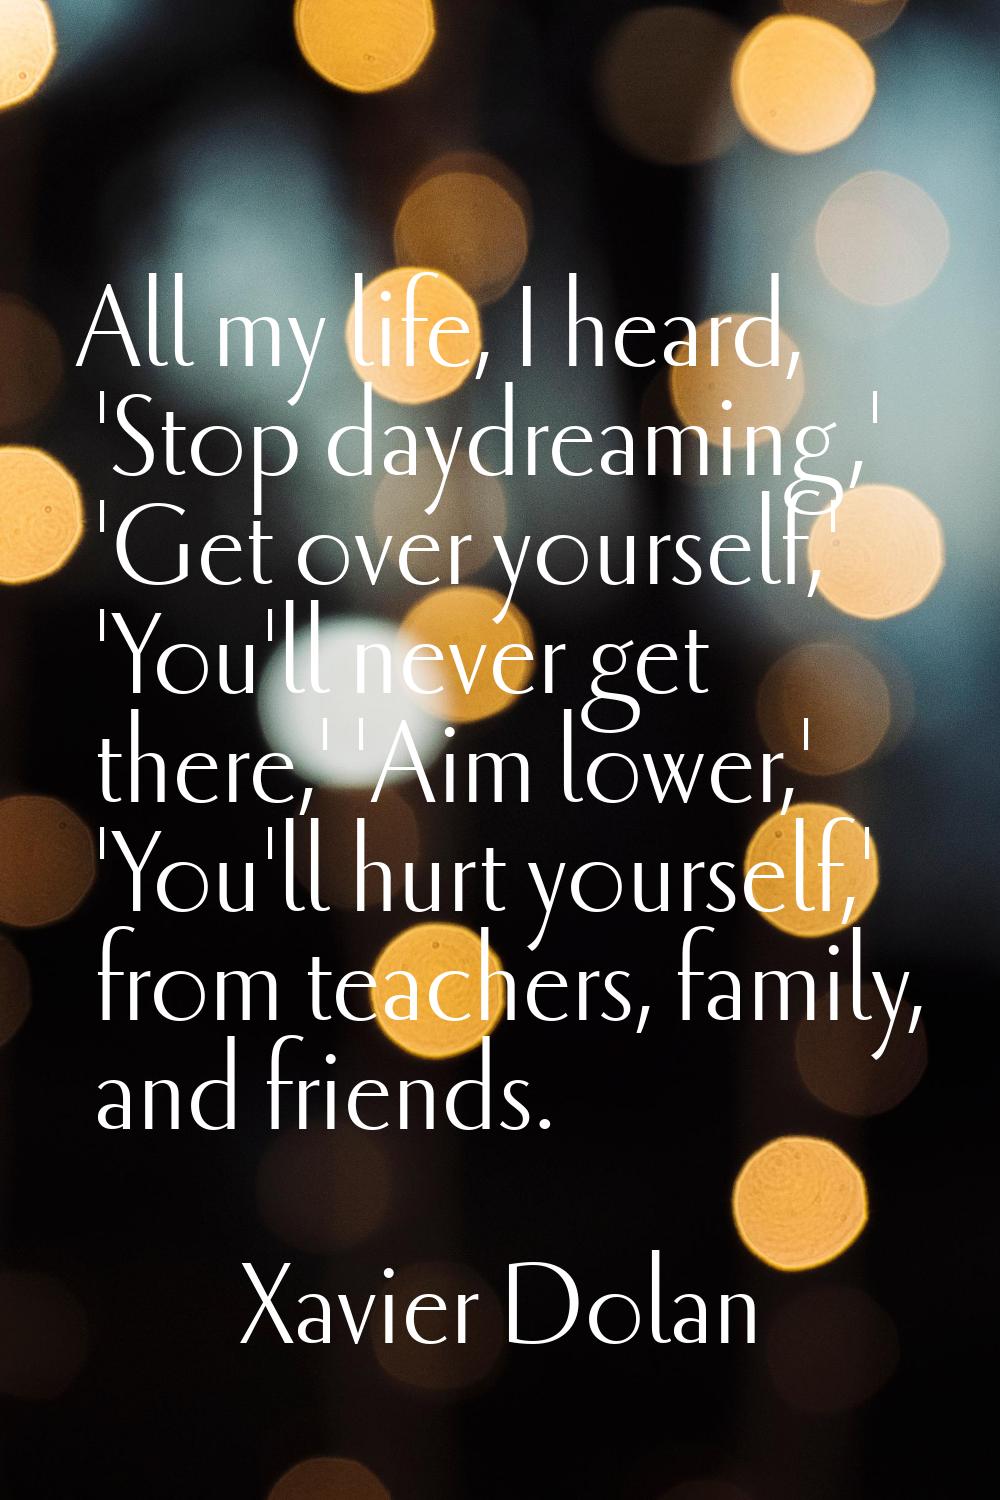 All my life, I heard, 'Stop daydreaming,' 'Get over yourself,' 'You'll never get there,' 'Aim lower